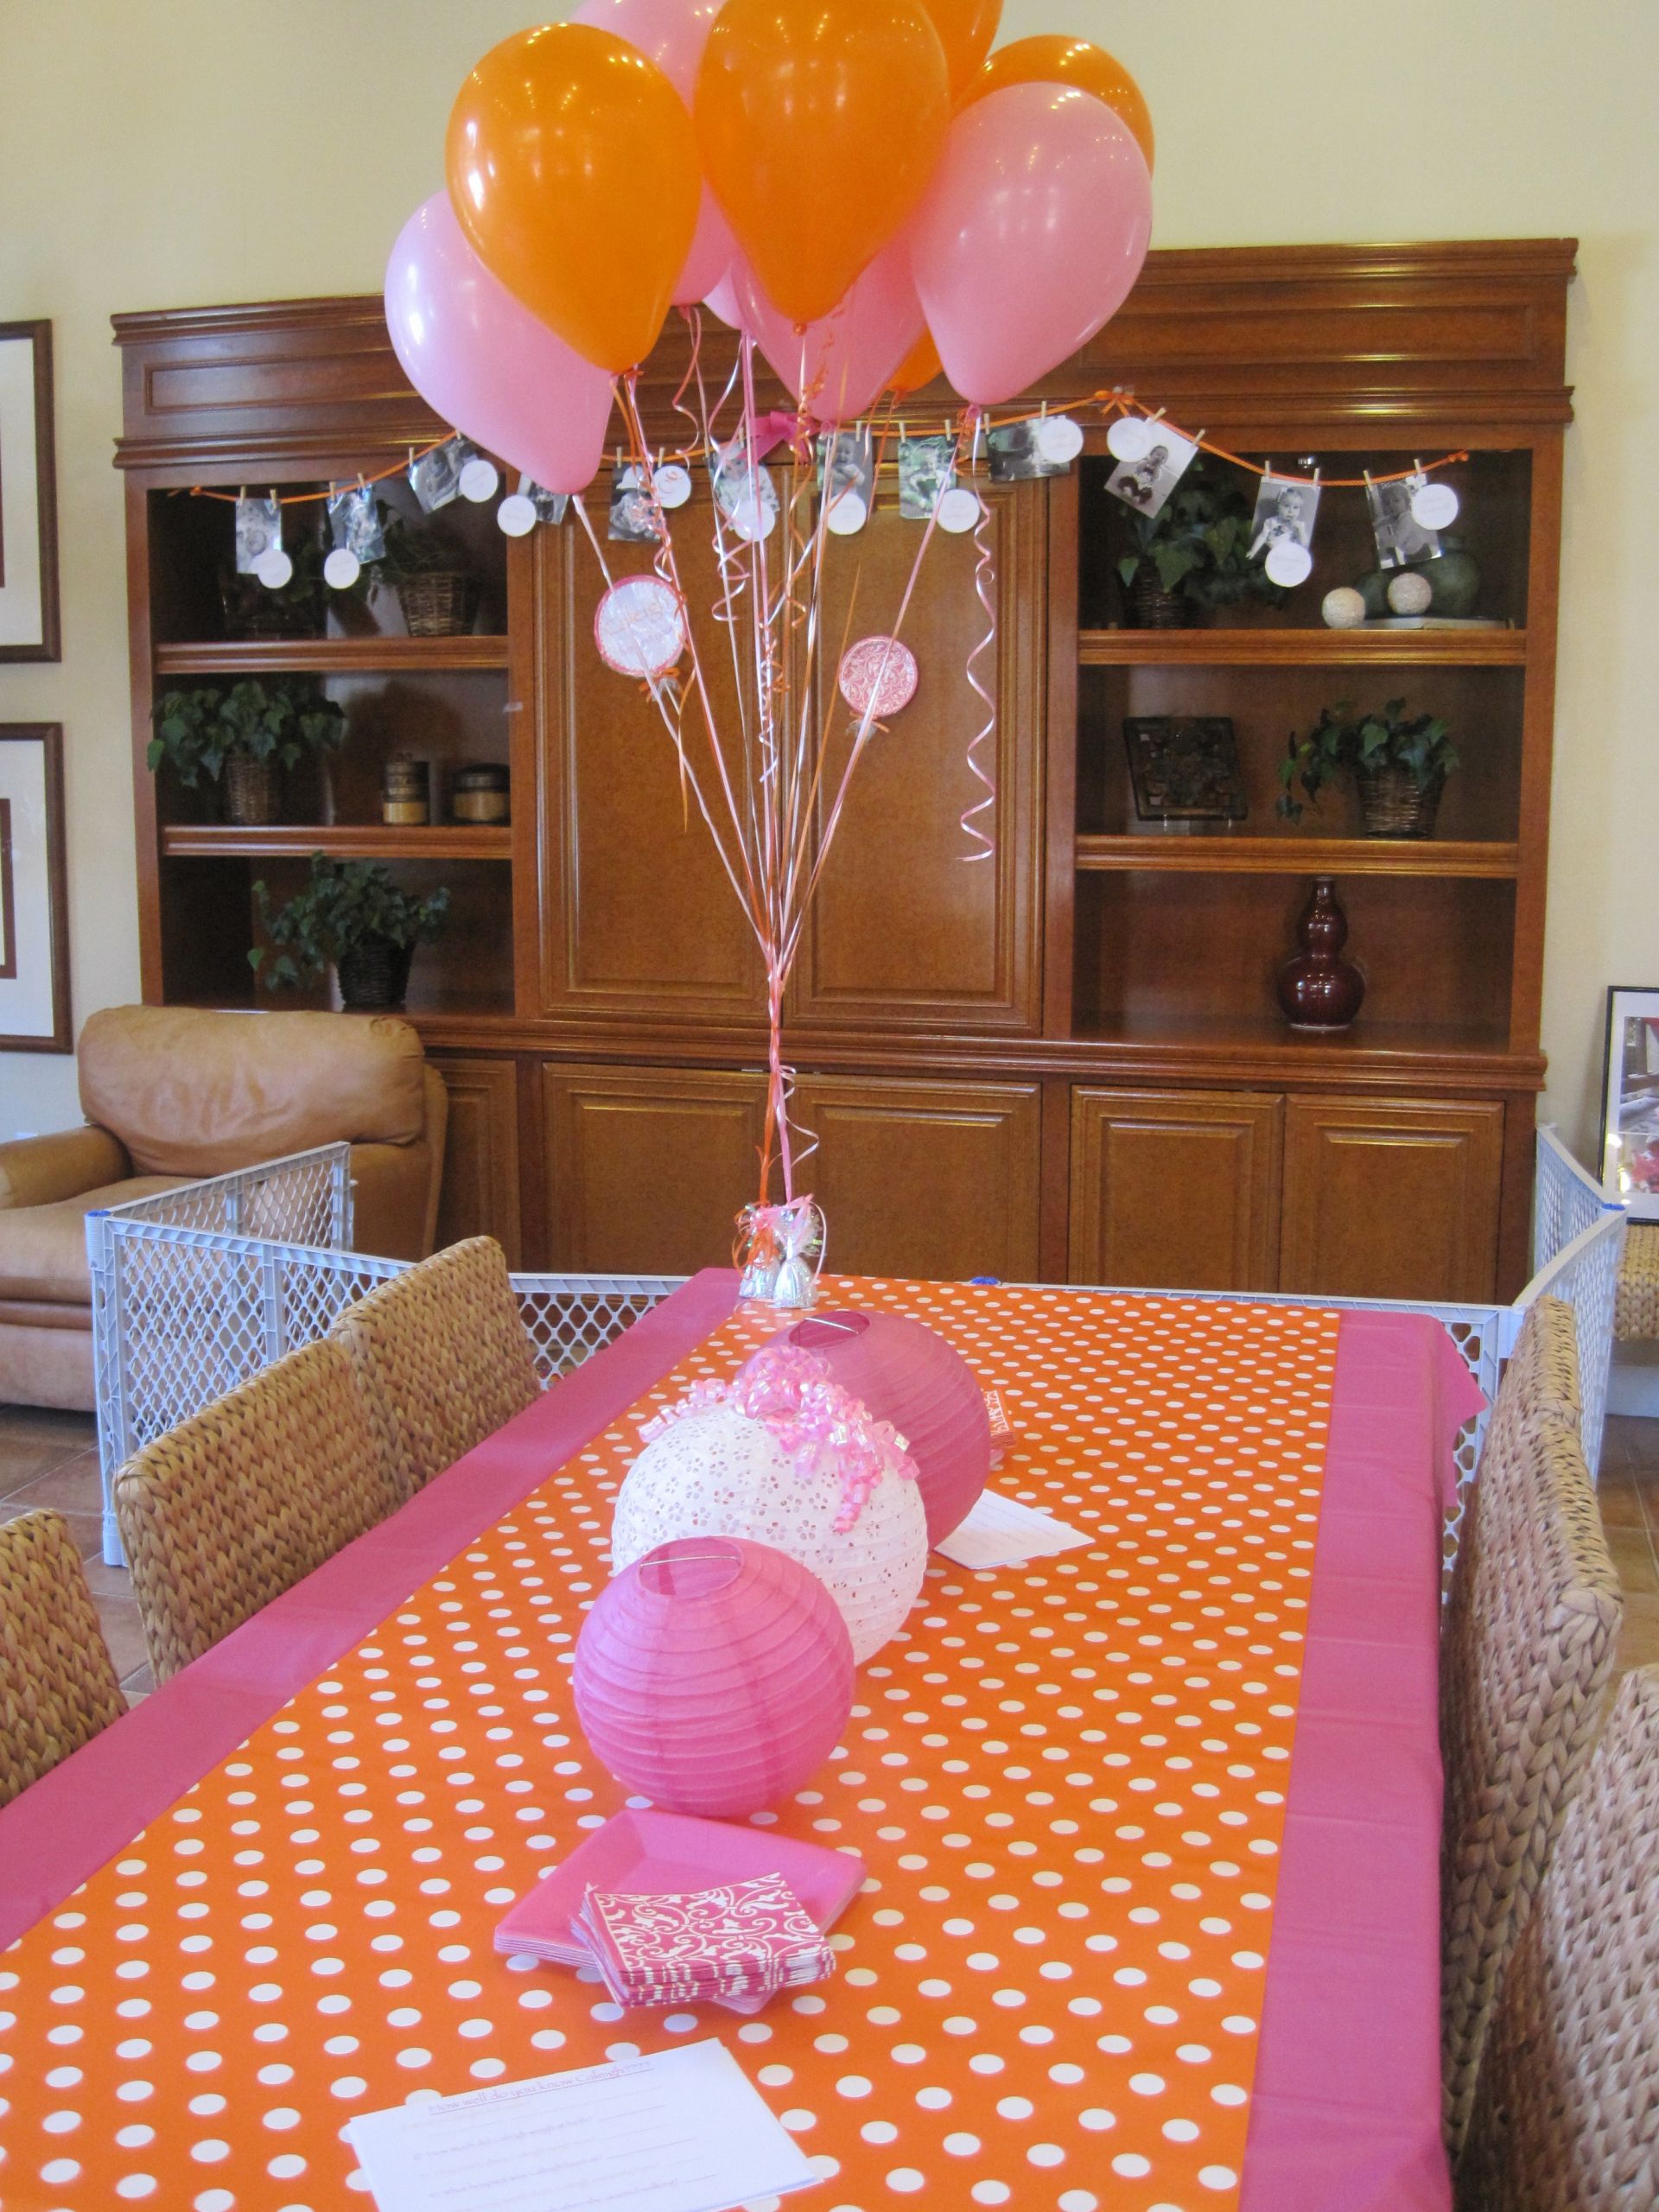 Birthday Party Table Decoration Ideas
 Caleigh’s Pink and Orange Lollipop Birthday